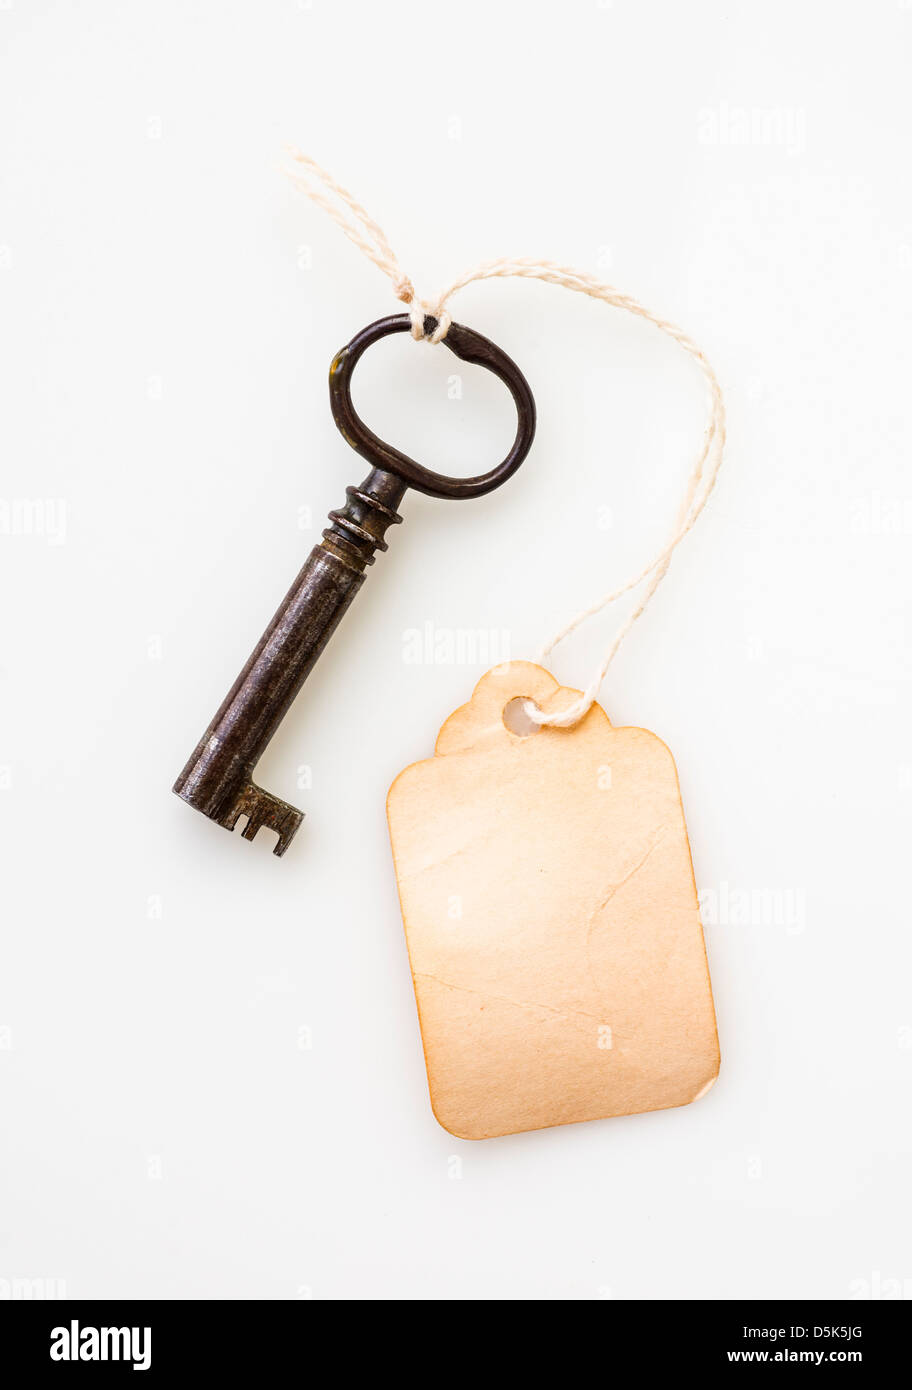 Antique key with tag Stock Photo